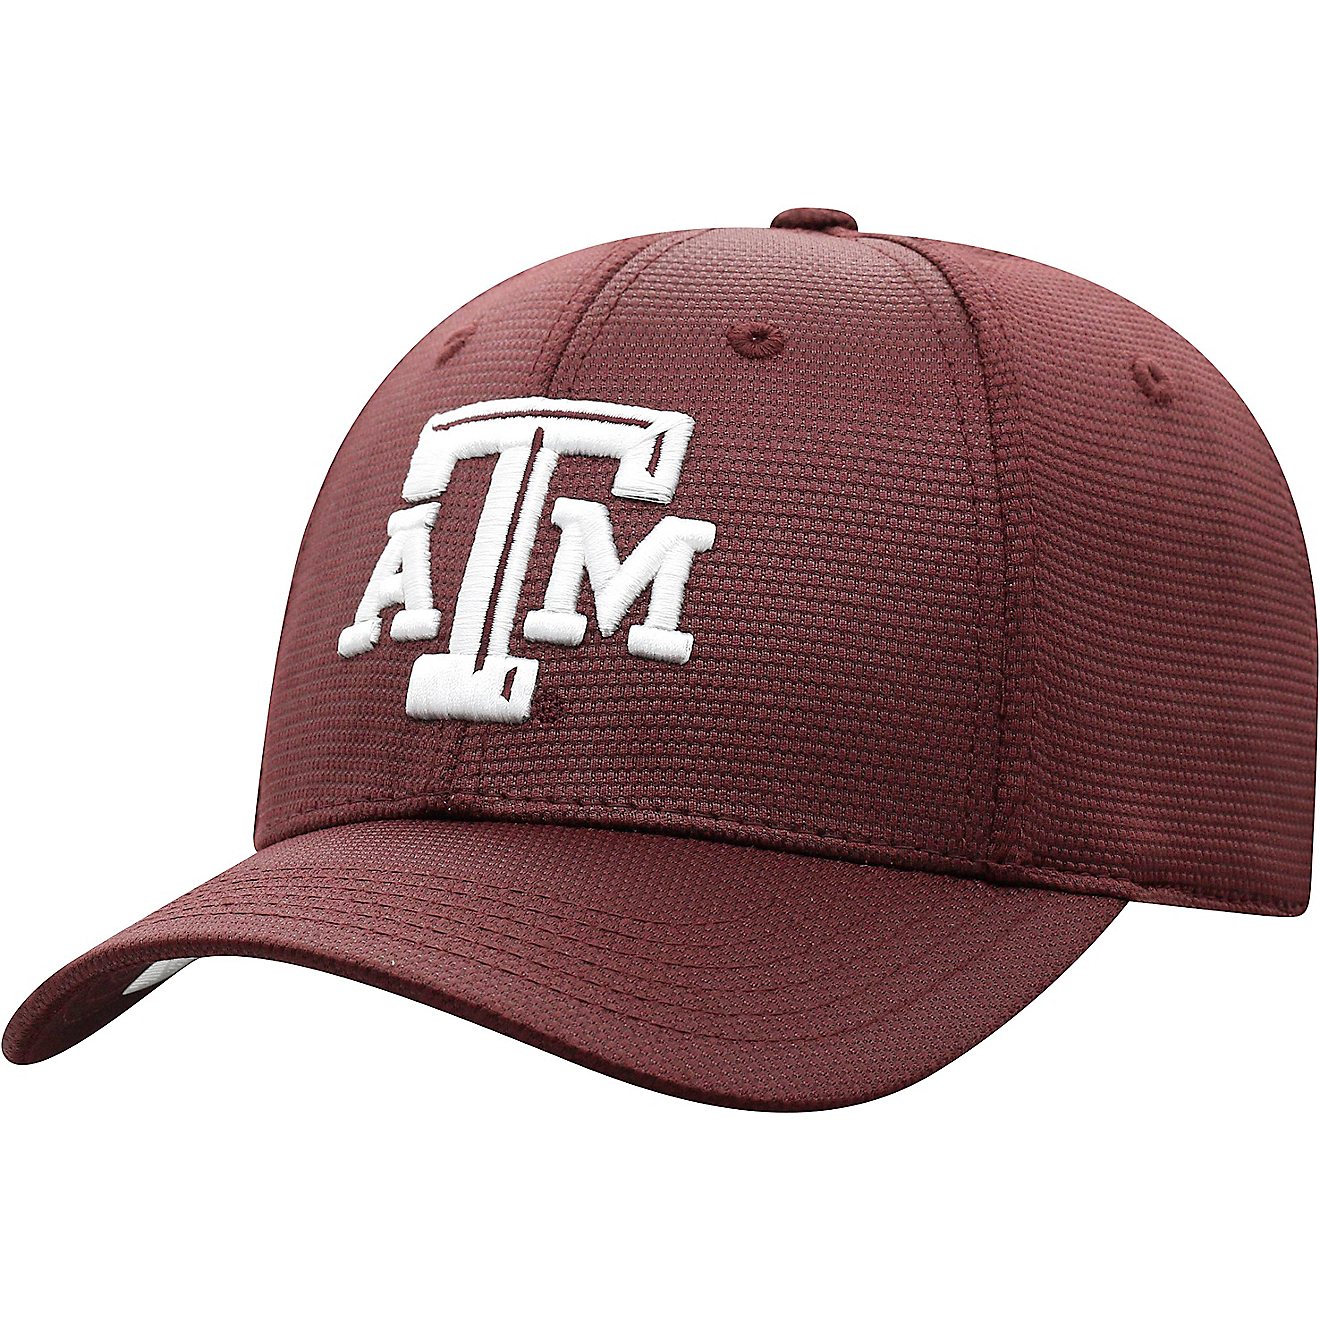 Top of the World Men's Texas A&M University Progo Cap                                                                            - view number 1